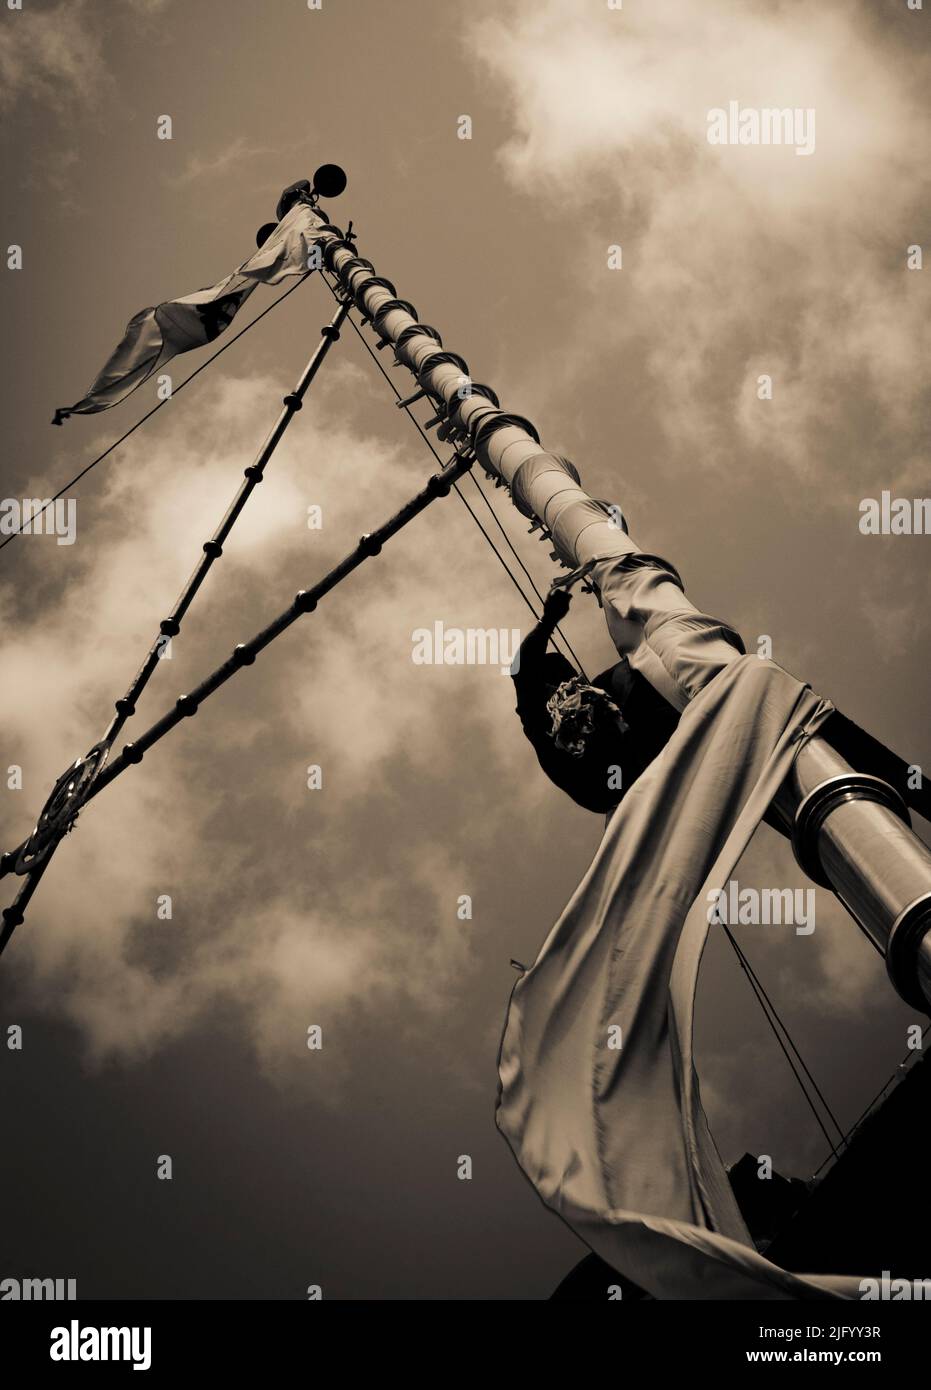 A low angle shot of a post with Nishan Sahib flag on it against a cloudy sky shot in monochrome Stock Photo